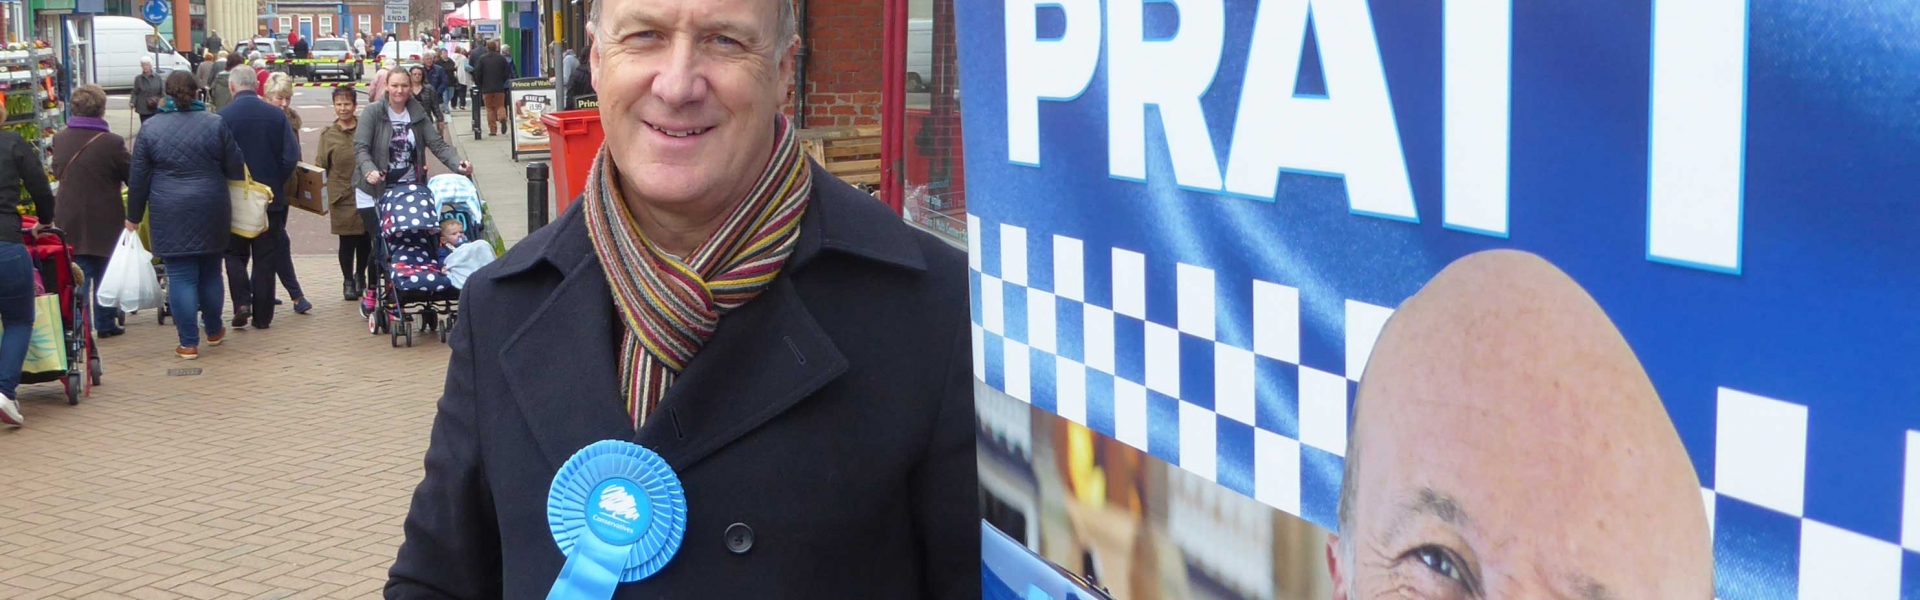 Andrew Platt, Conservative candidate for Police Commissioner